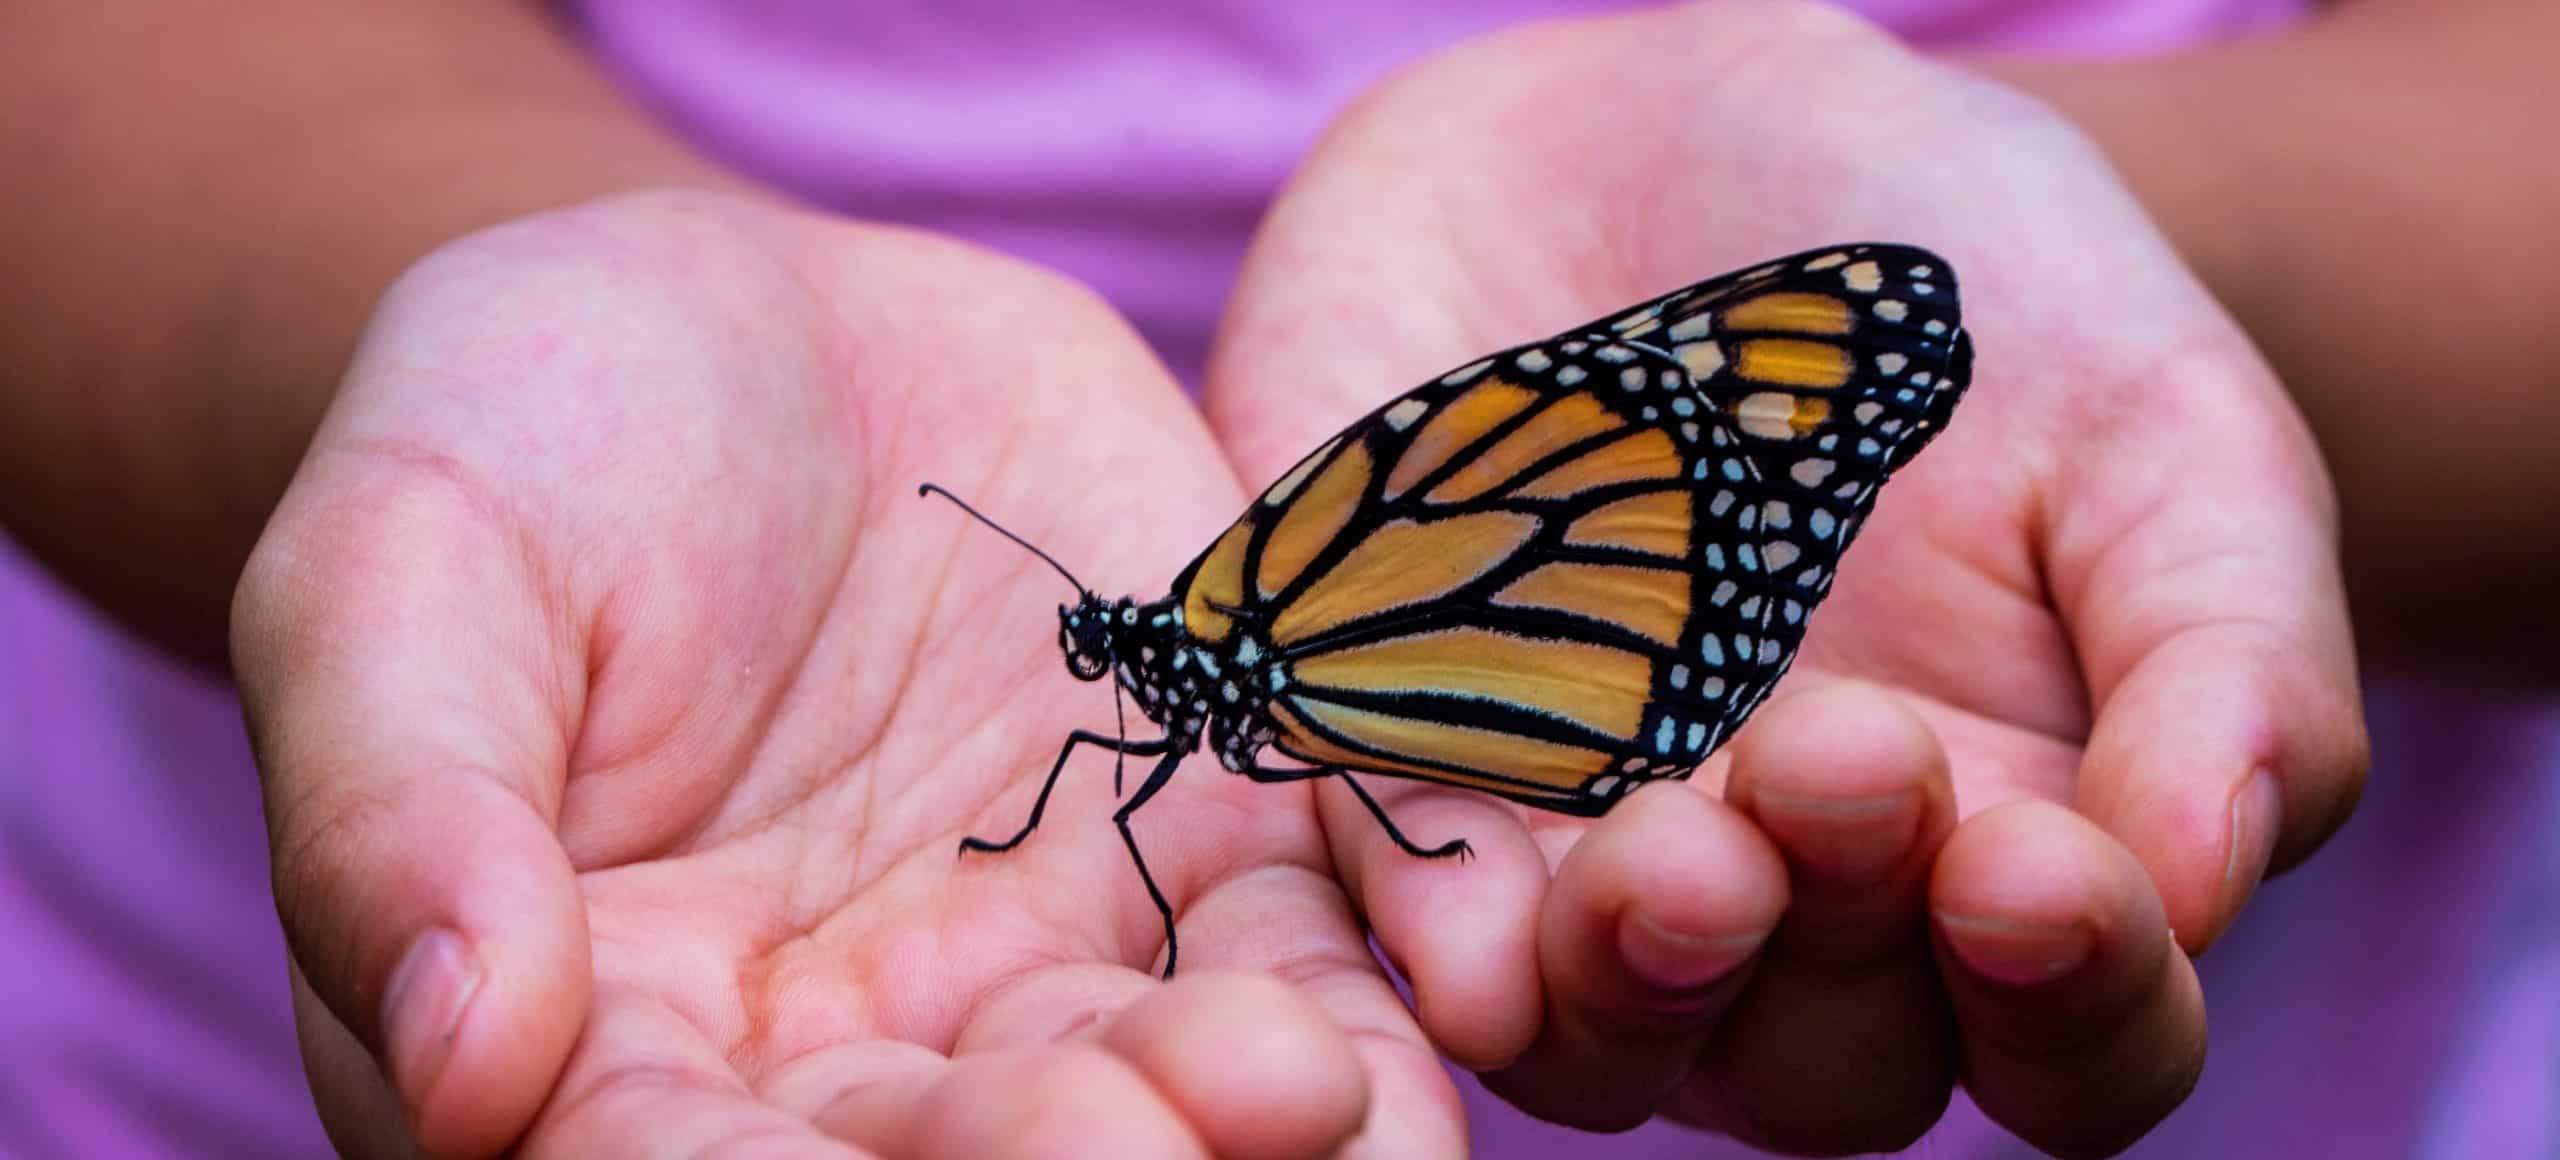 Close-up of a black and orange monarch butterfly perched in the palms of a child's hands